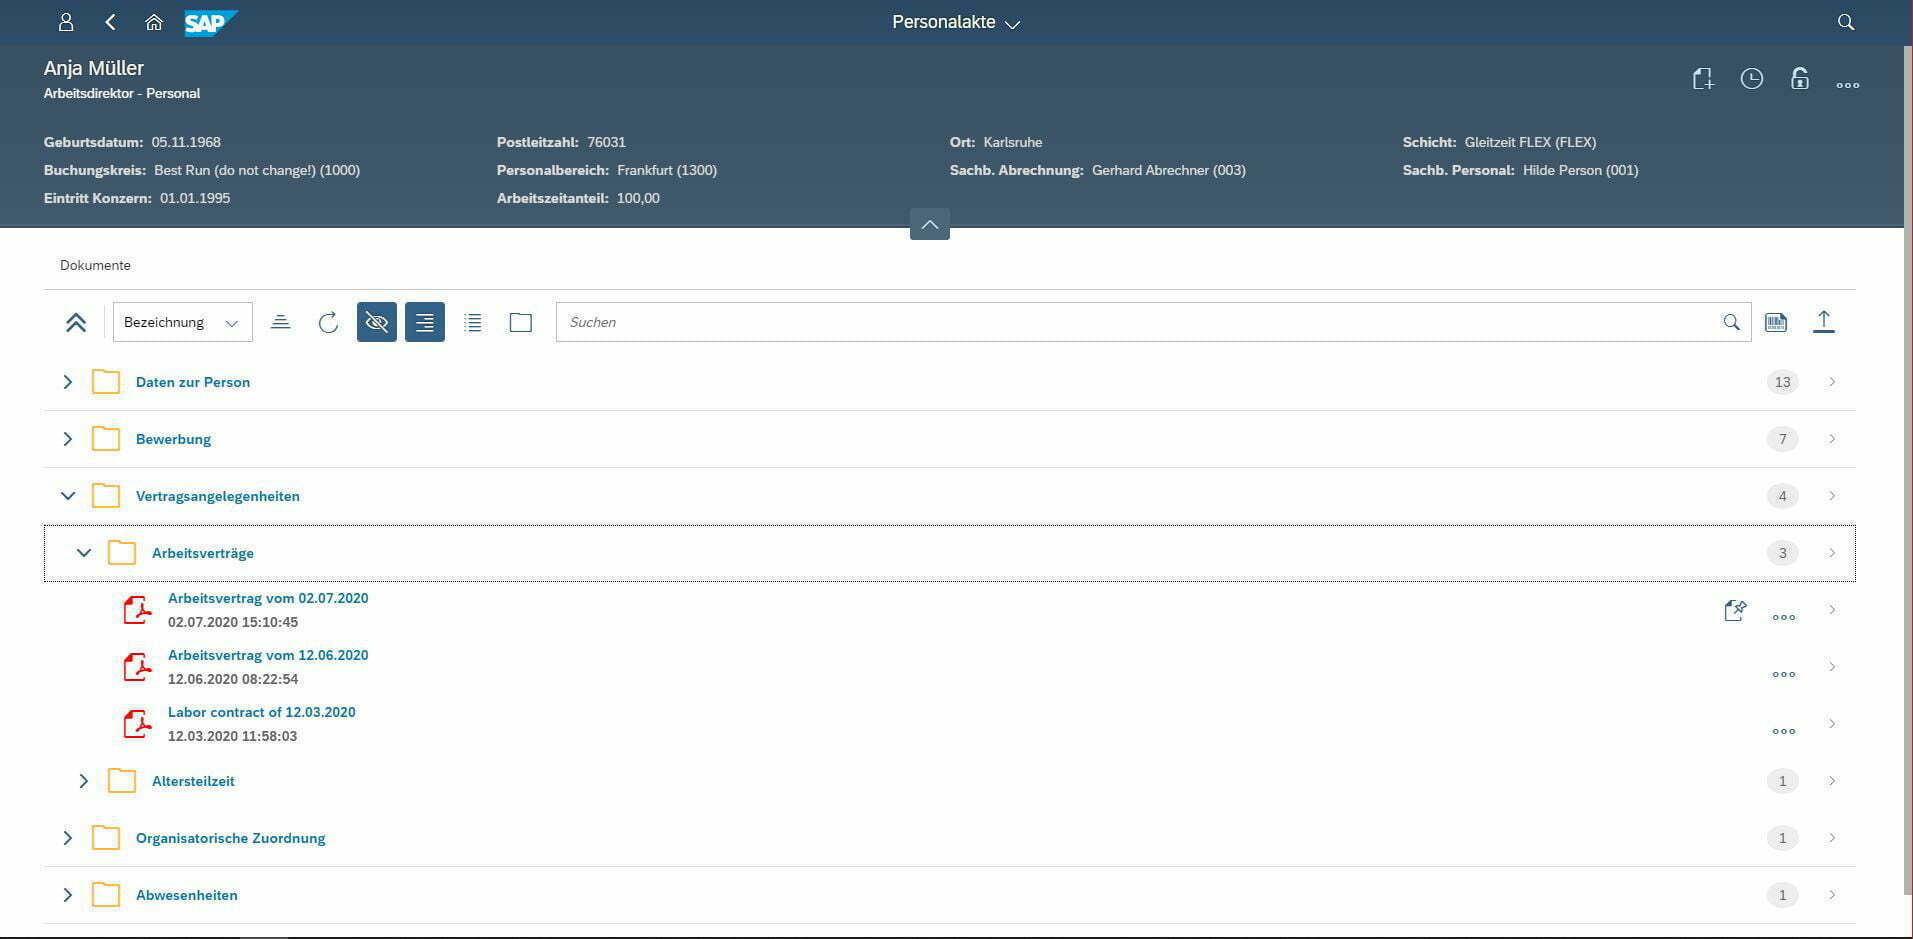 SAP FIORI applications. Here is an example of a personnel file.